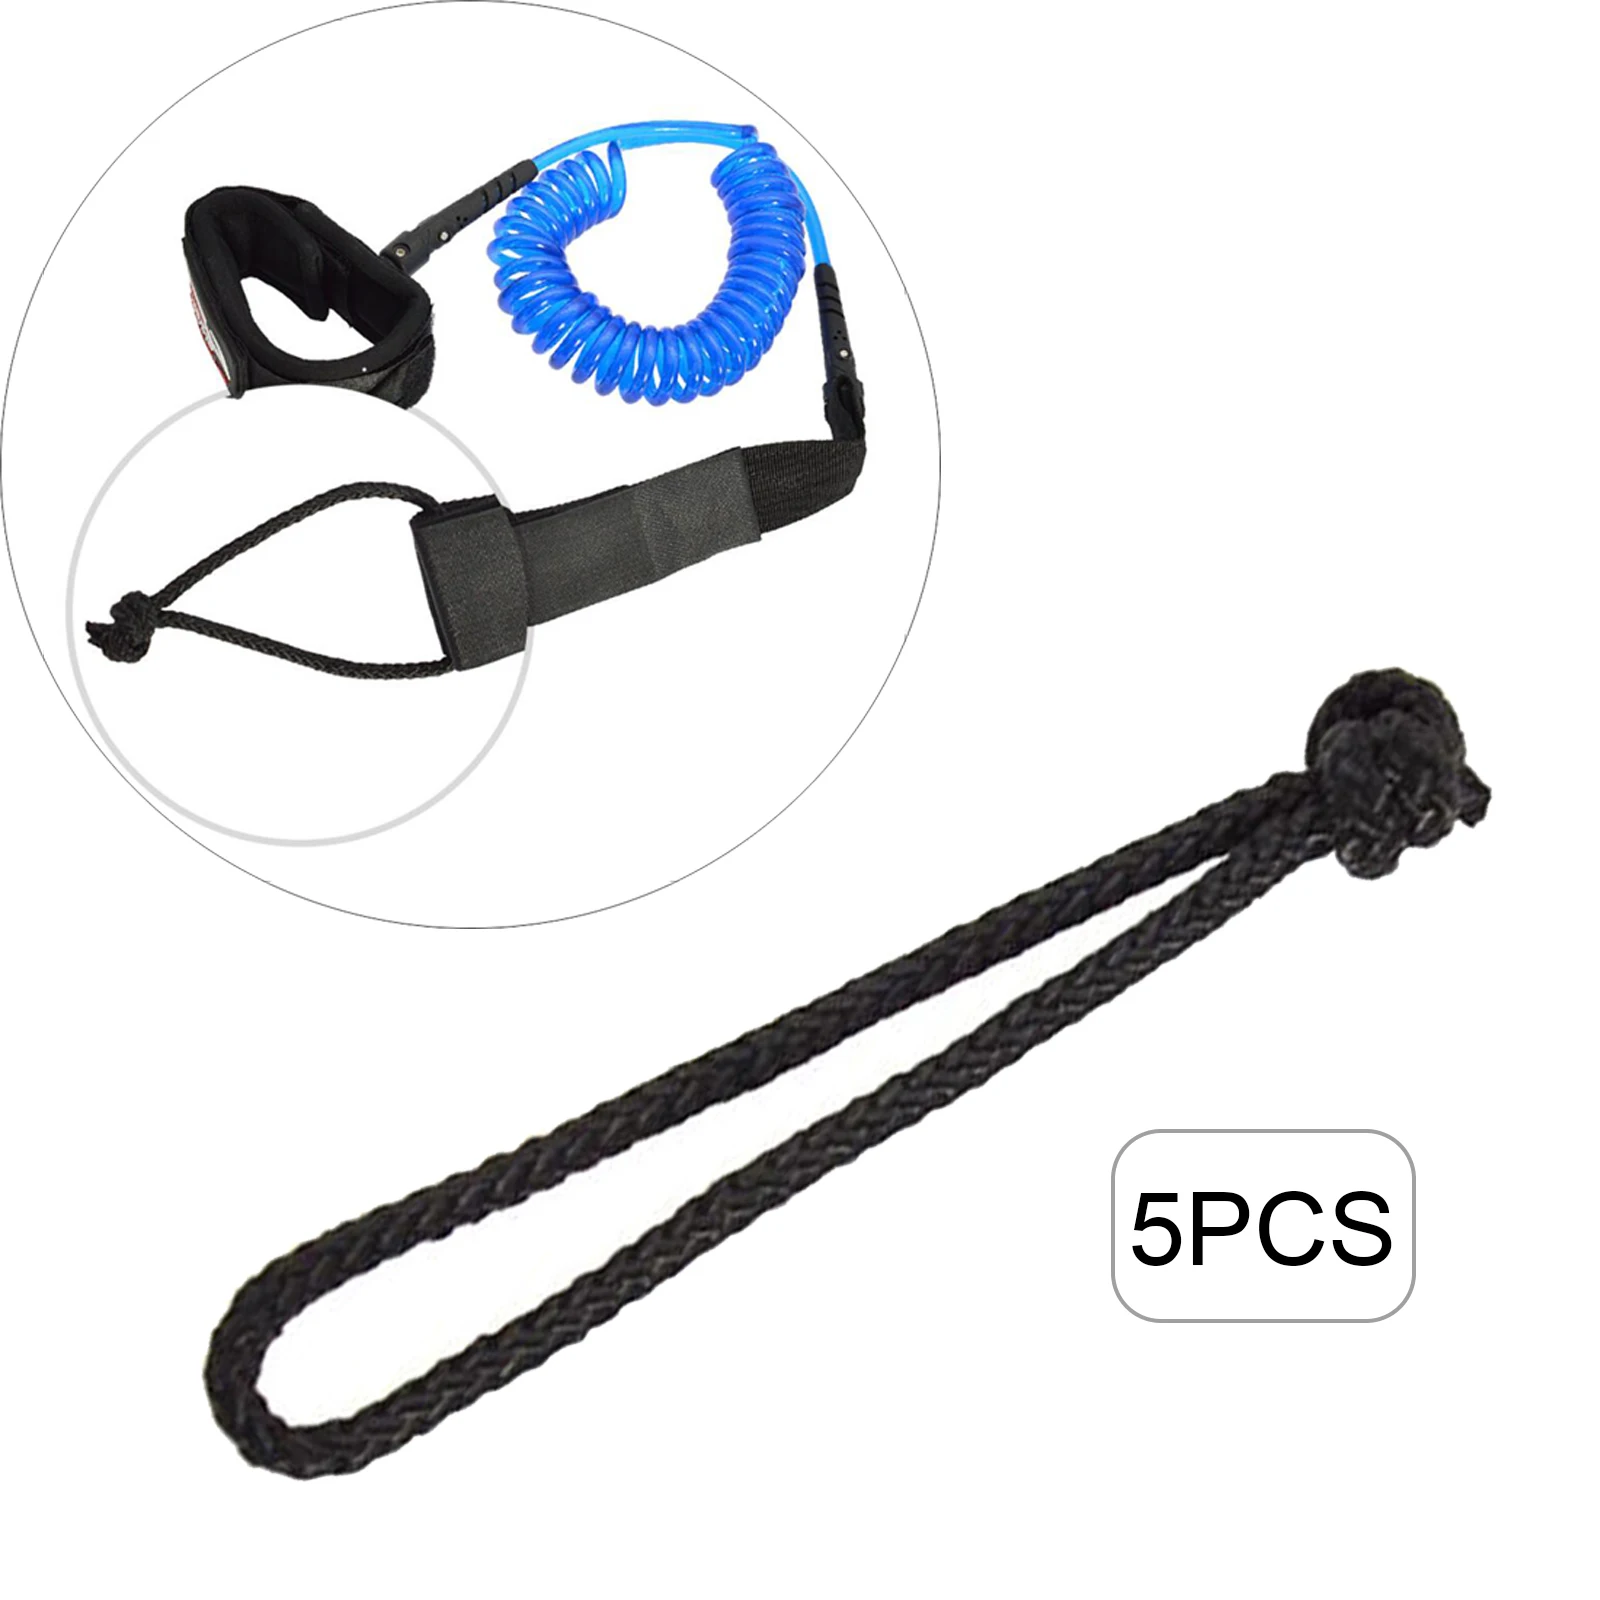 Set of 5 Leash String Cord for Stand-Up Paddle Board Surfboard Longboard